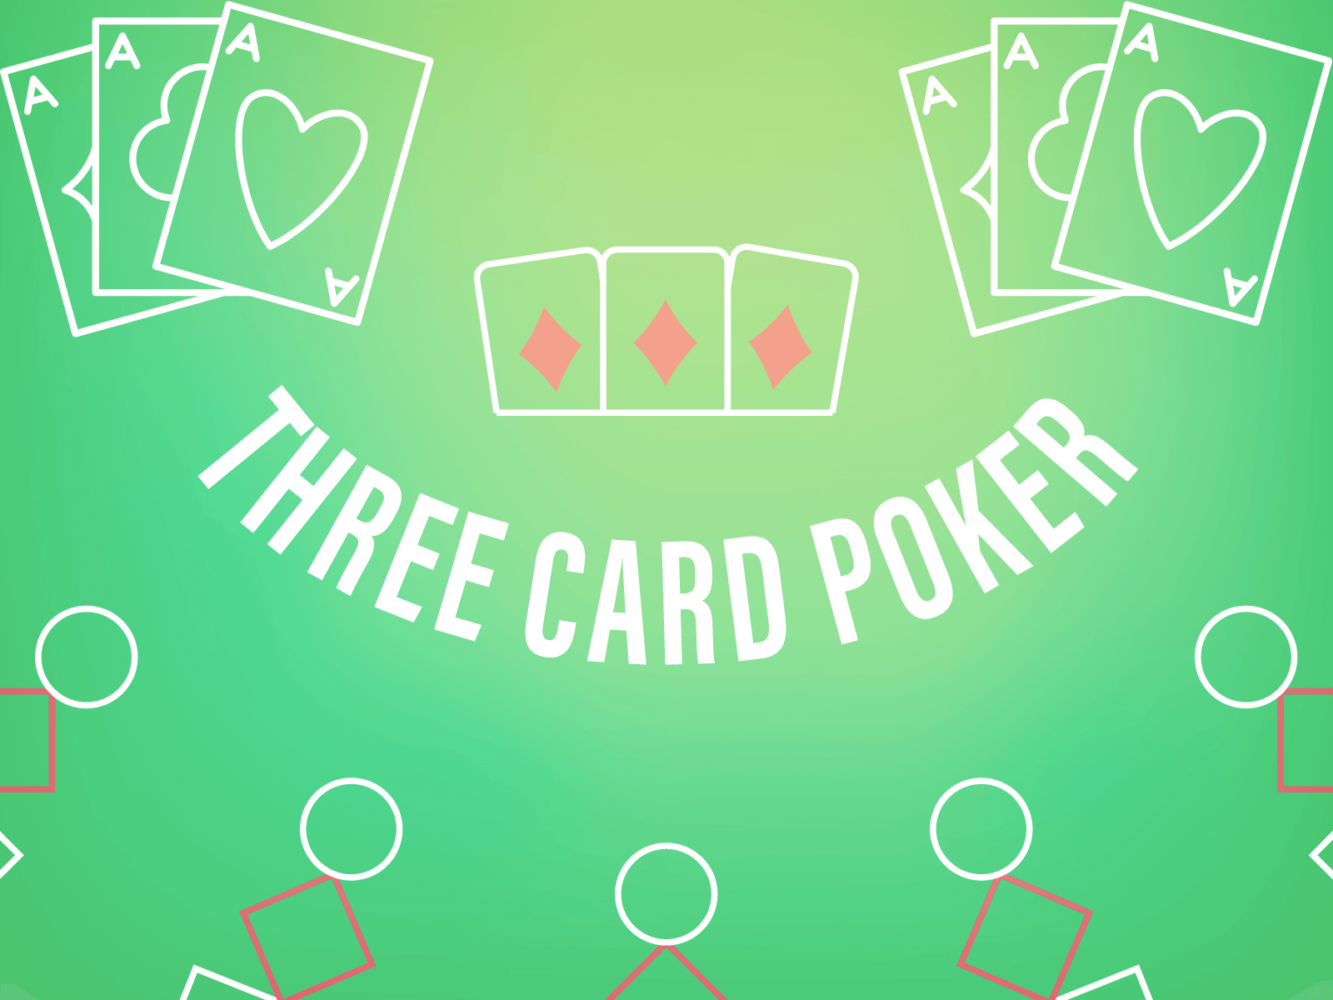 How to Play 3 Card Poker